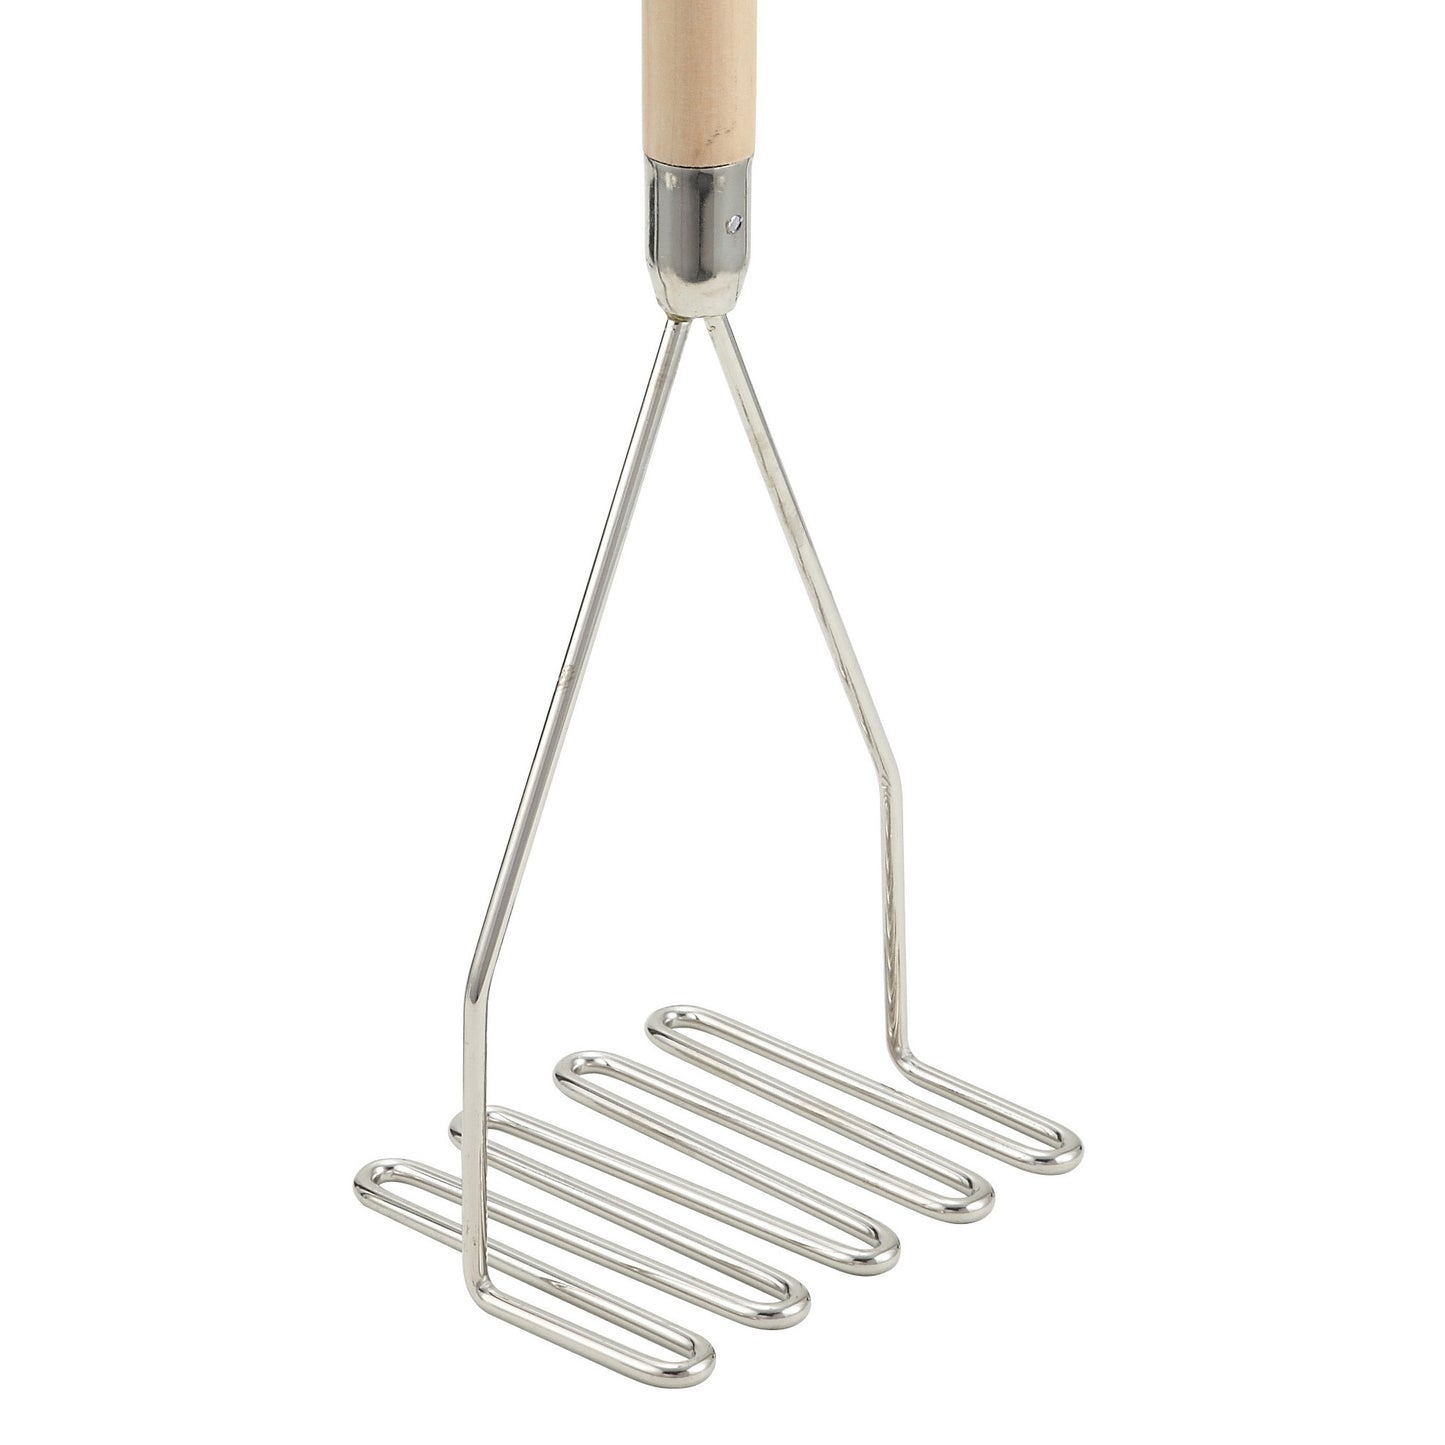 PTM-24S - Potato Masher with Wooden Handle - 5-1/4" Square